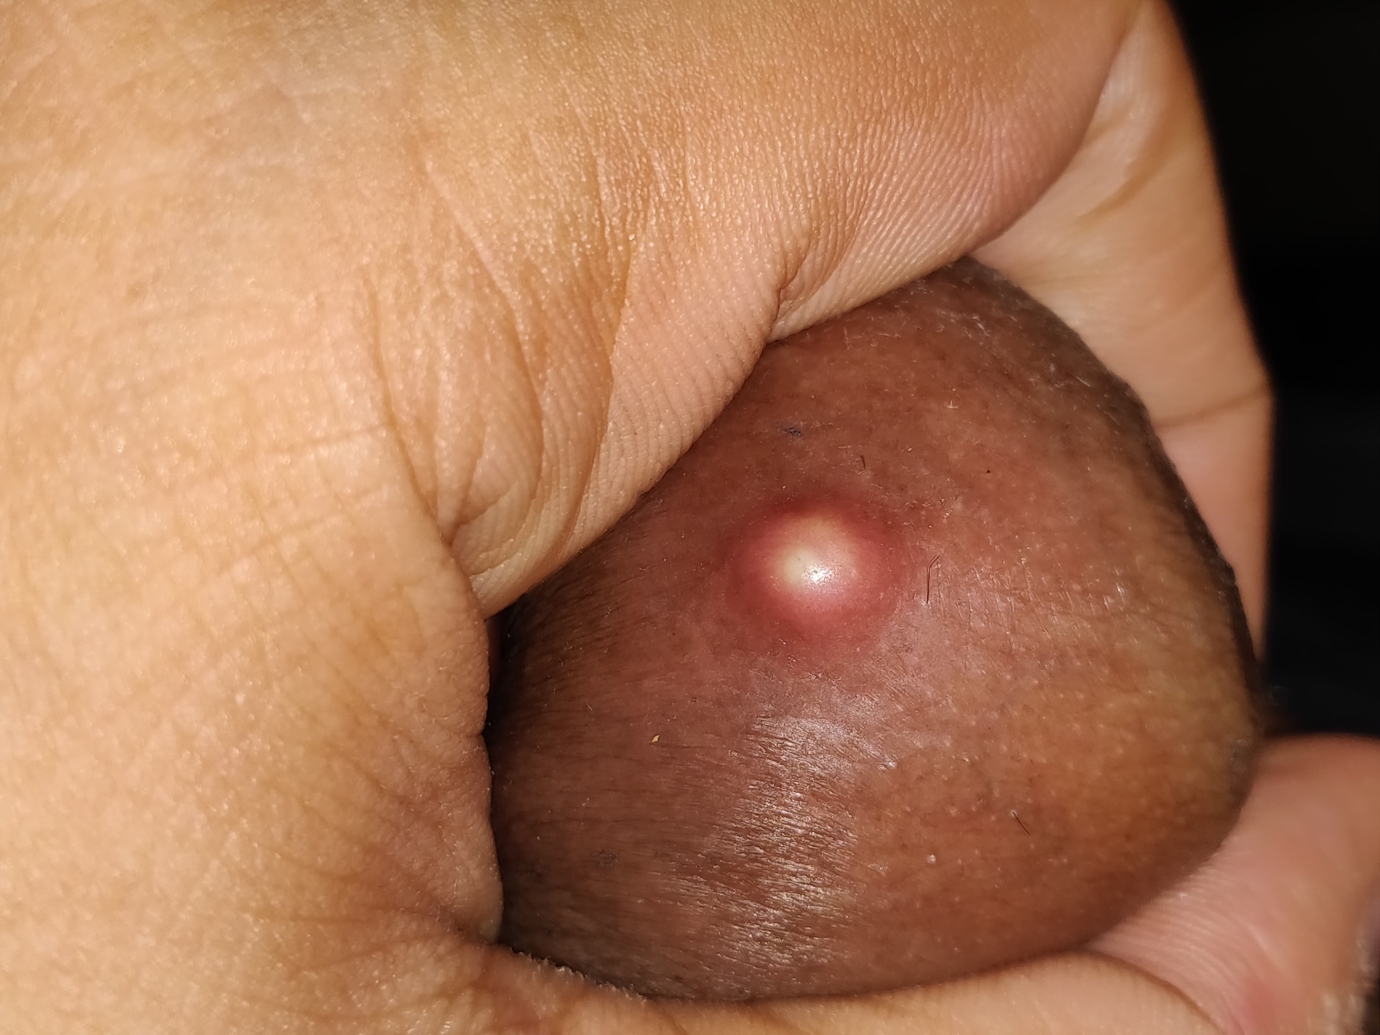 Pimple Ingrown Hair What Is This On My Penile Shaft Penis Disorders Forums ...